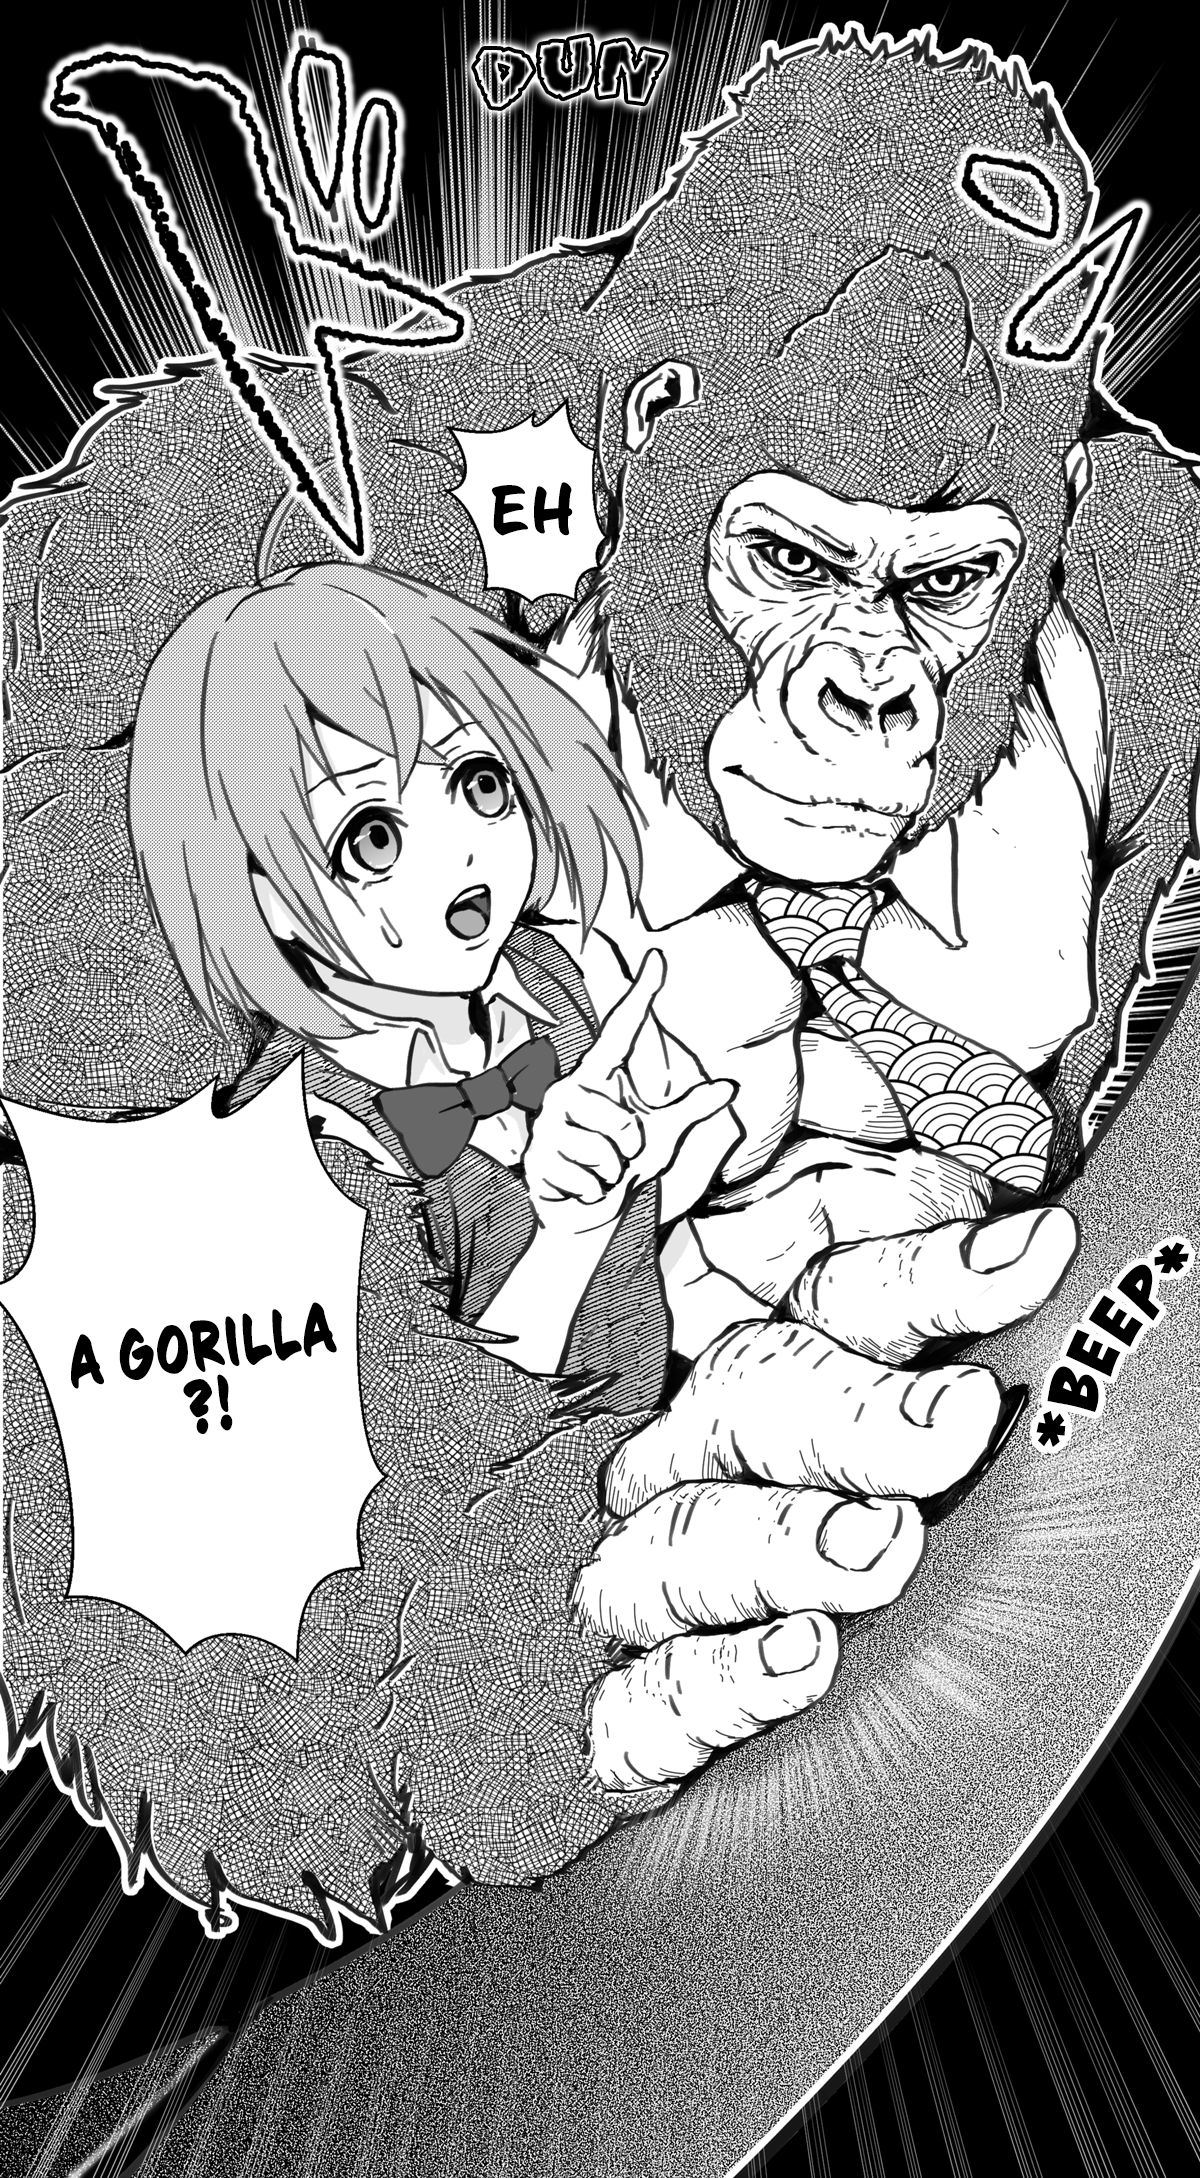 An Extremely Attractive Gorilla - Page 3